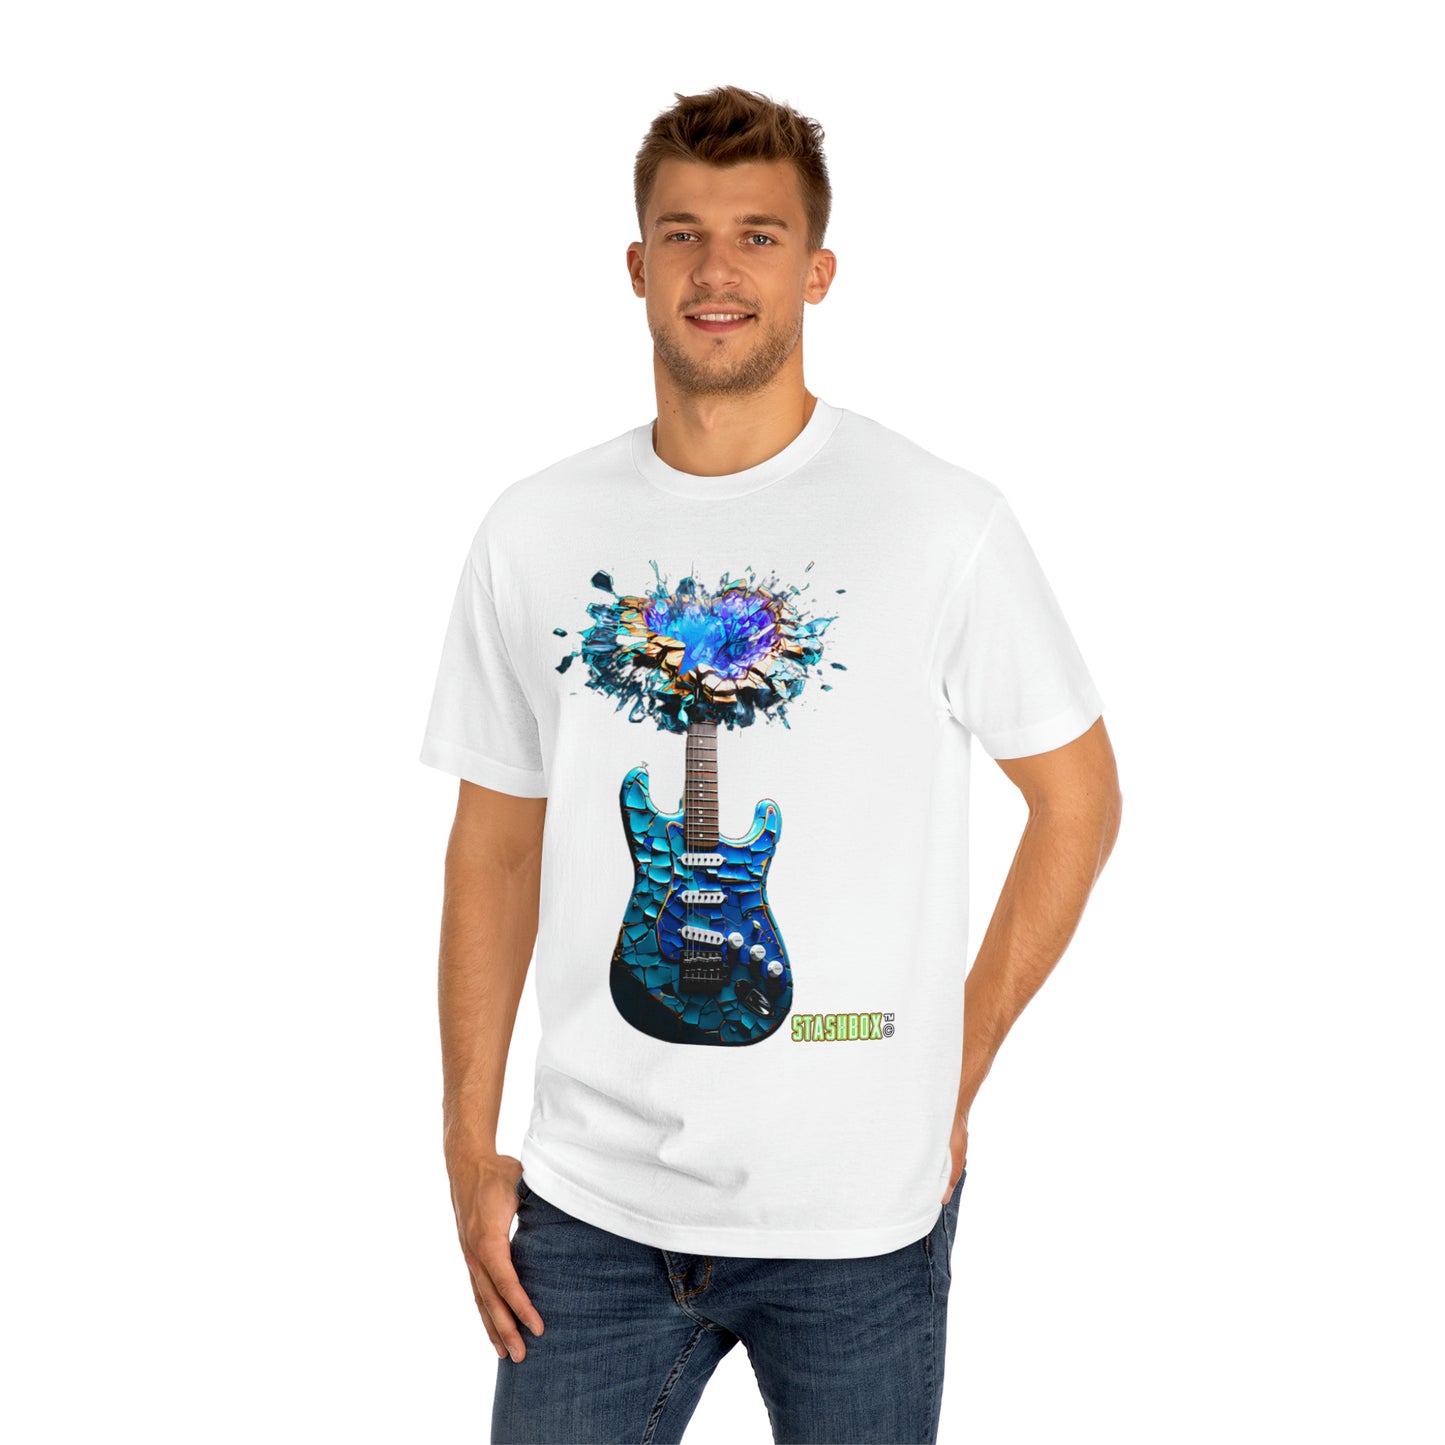 Unisex Classic Tshirt - Turquoise Electric Guitar - Scaled Tiles with color explosion 002